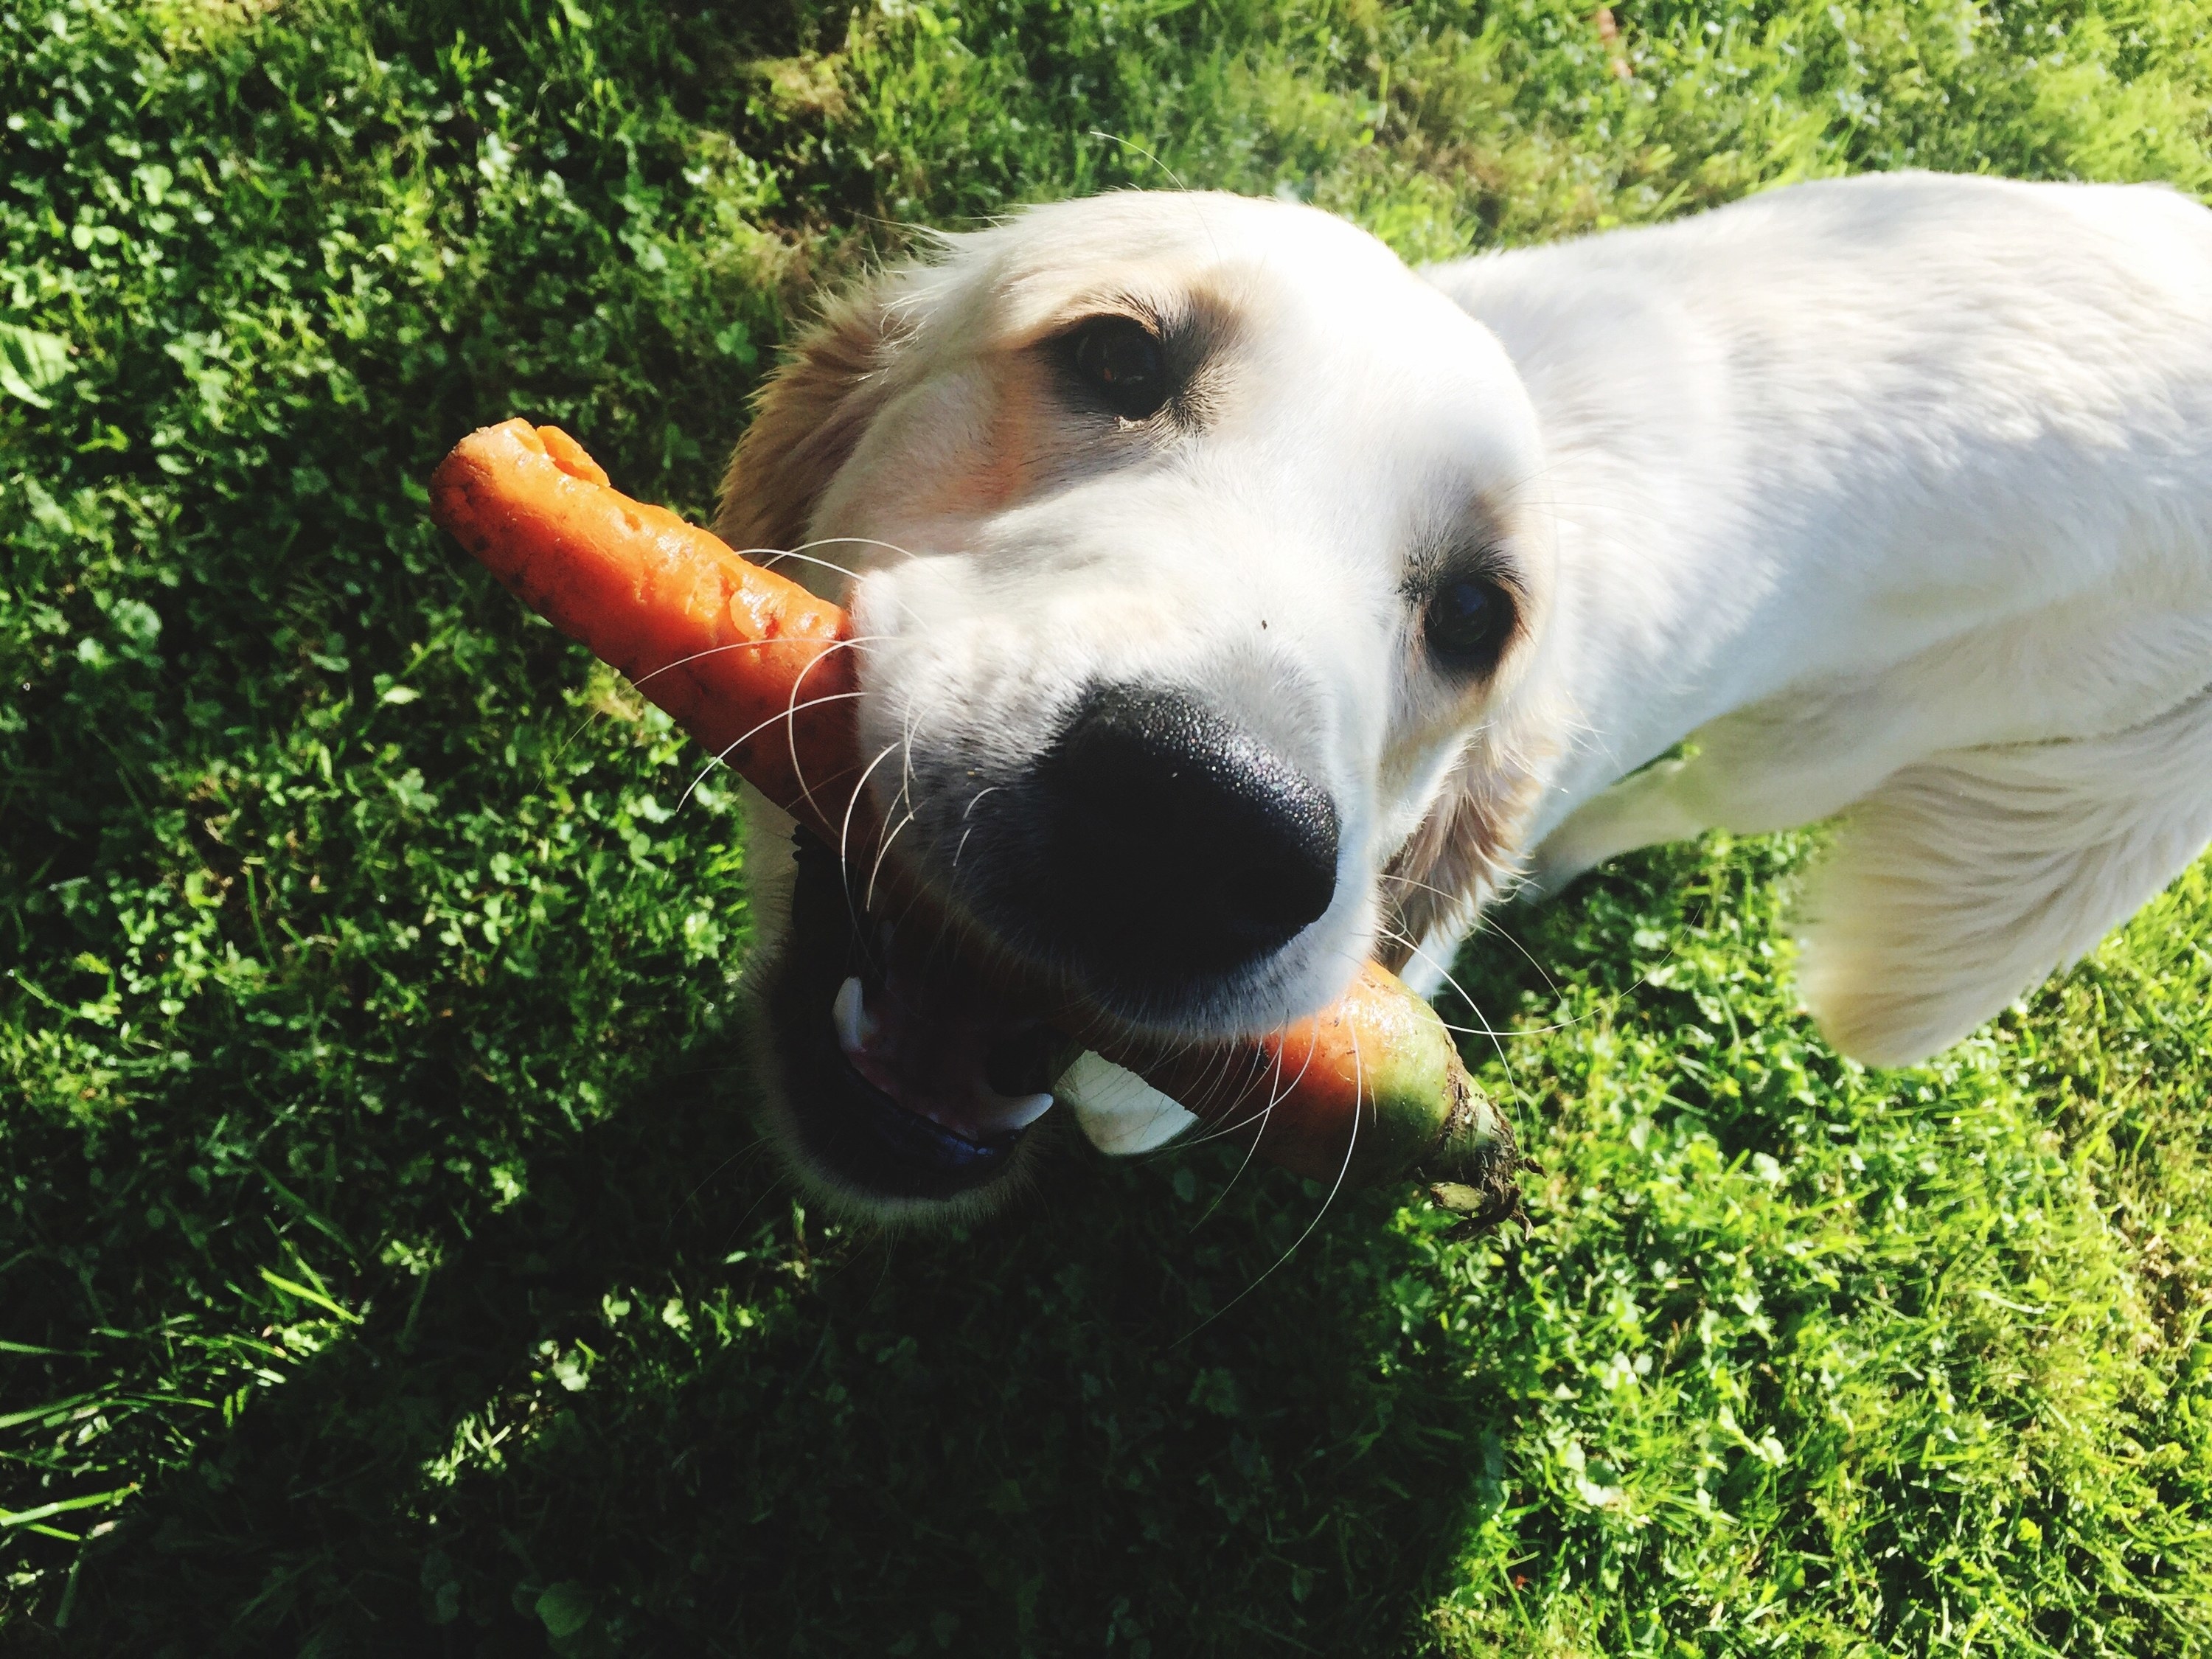 A golden retriever dog smiles up at the camera with a carrot in its mouth.